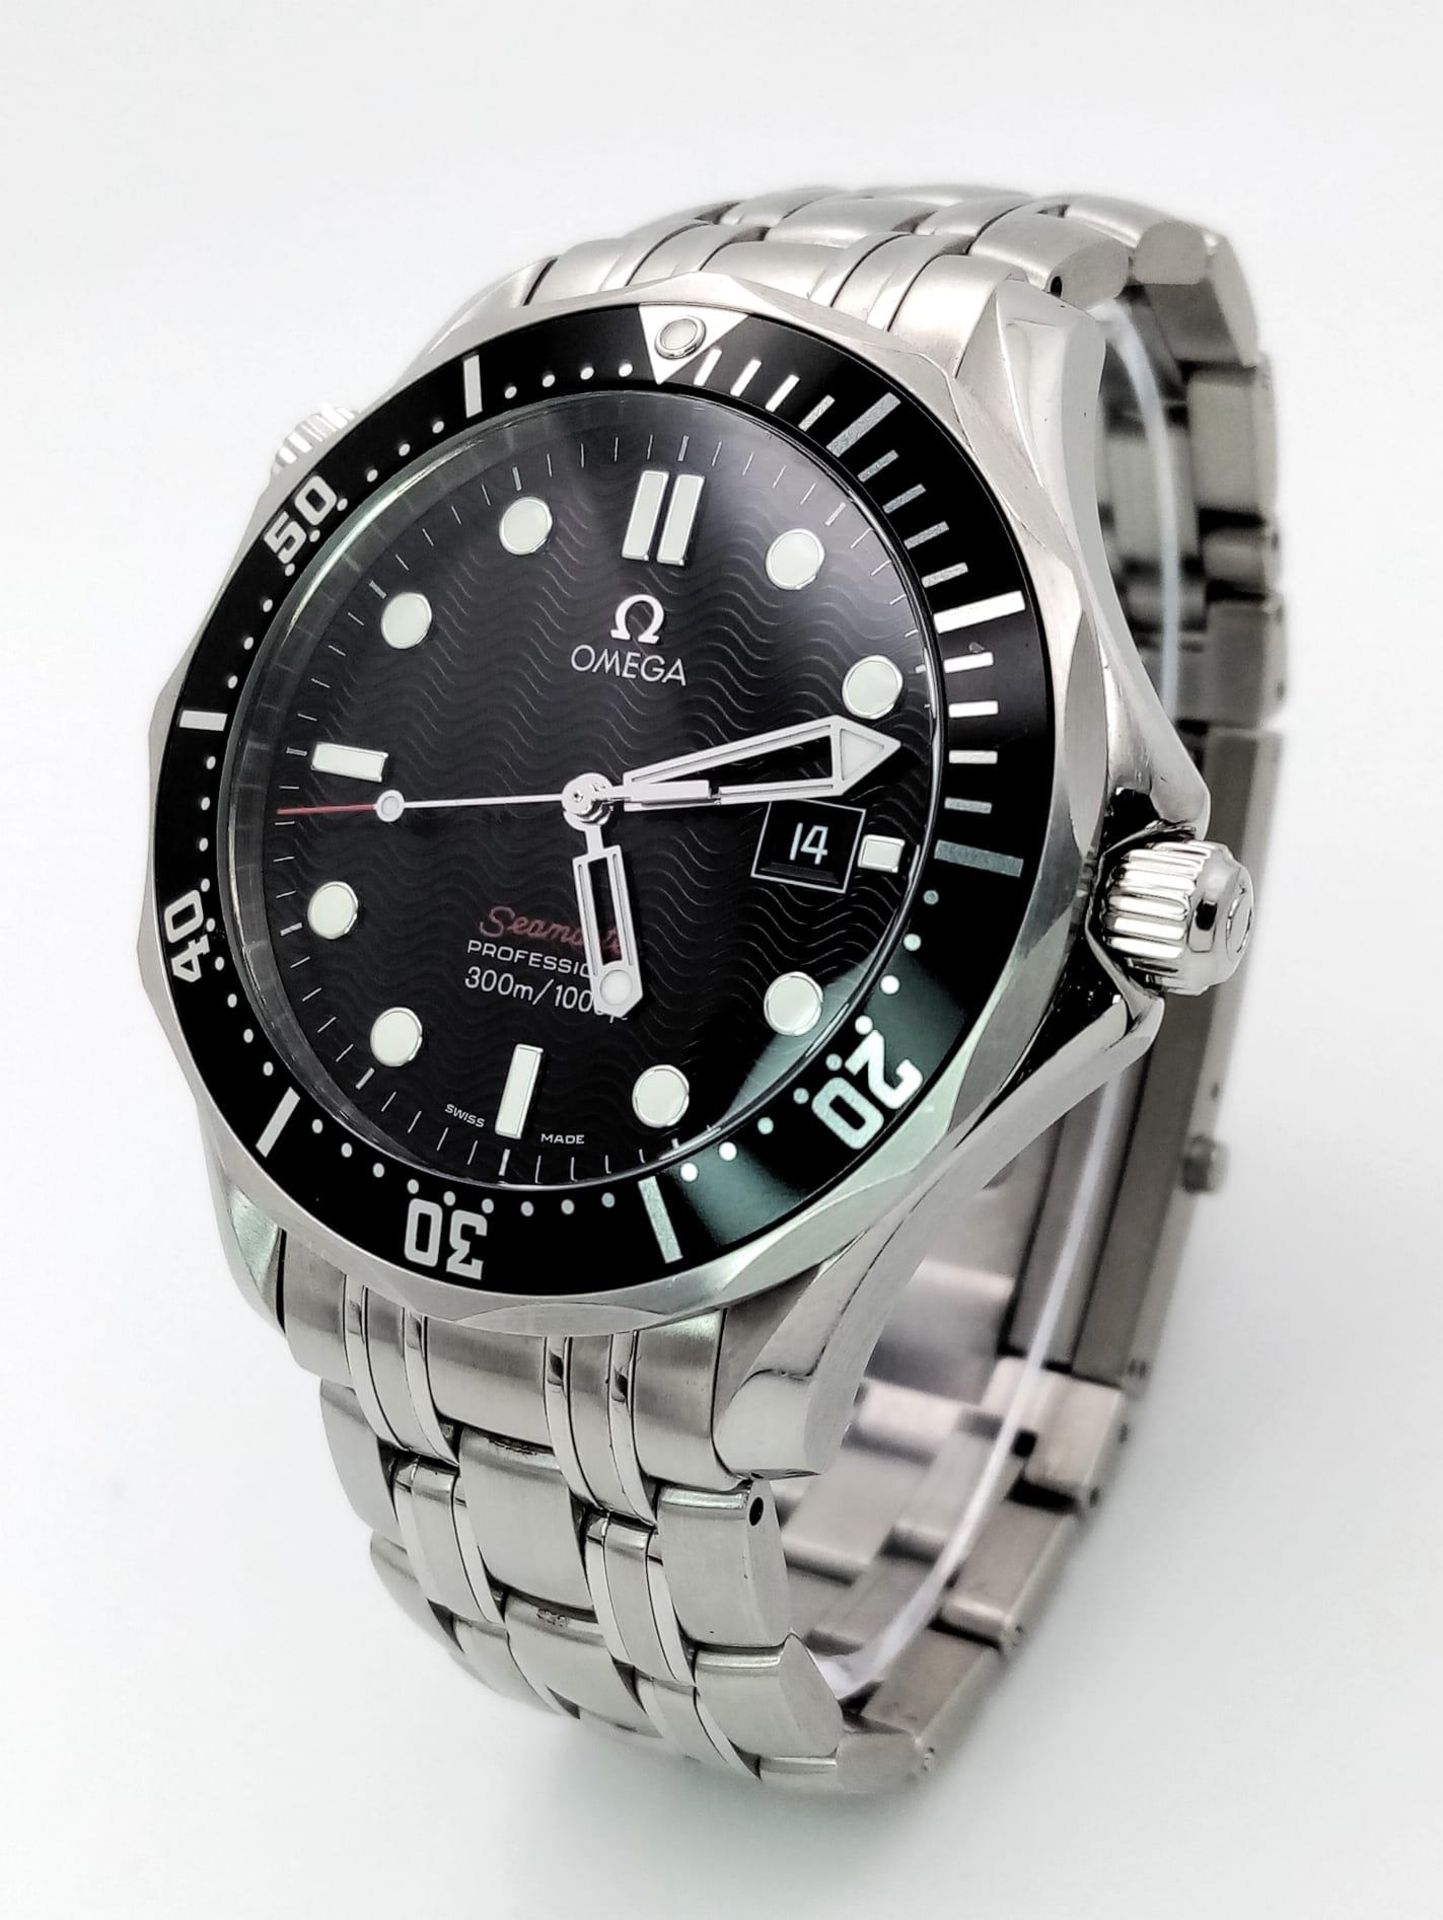 An Omega Seamaster Professional Gents Watch. Stainless steel bracelet and case - 41mm. Black dial